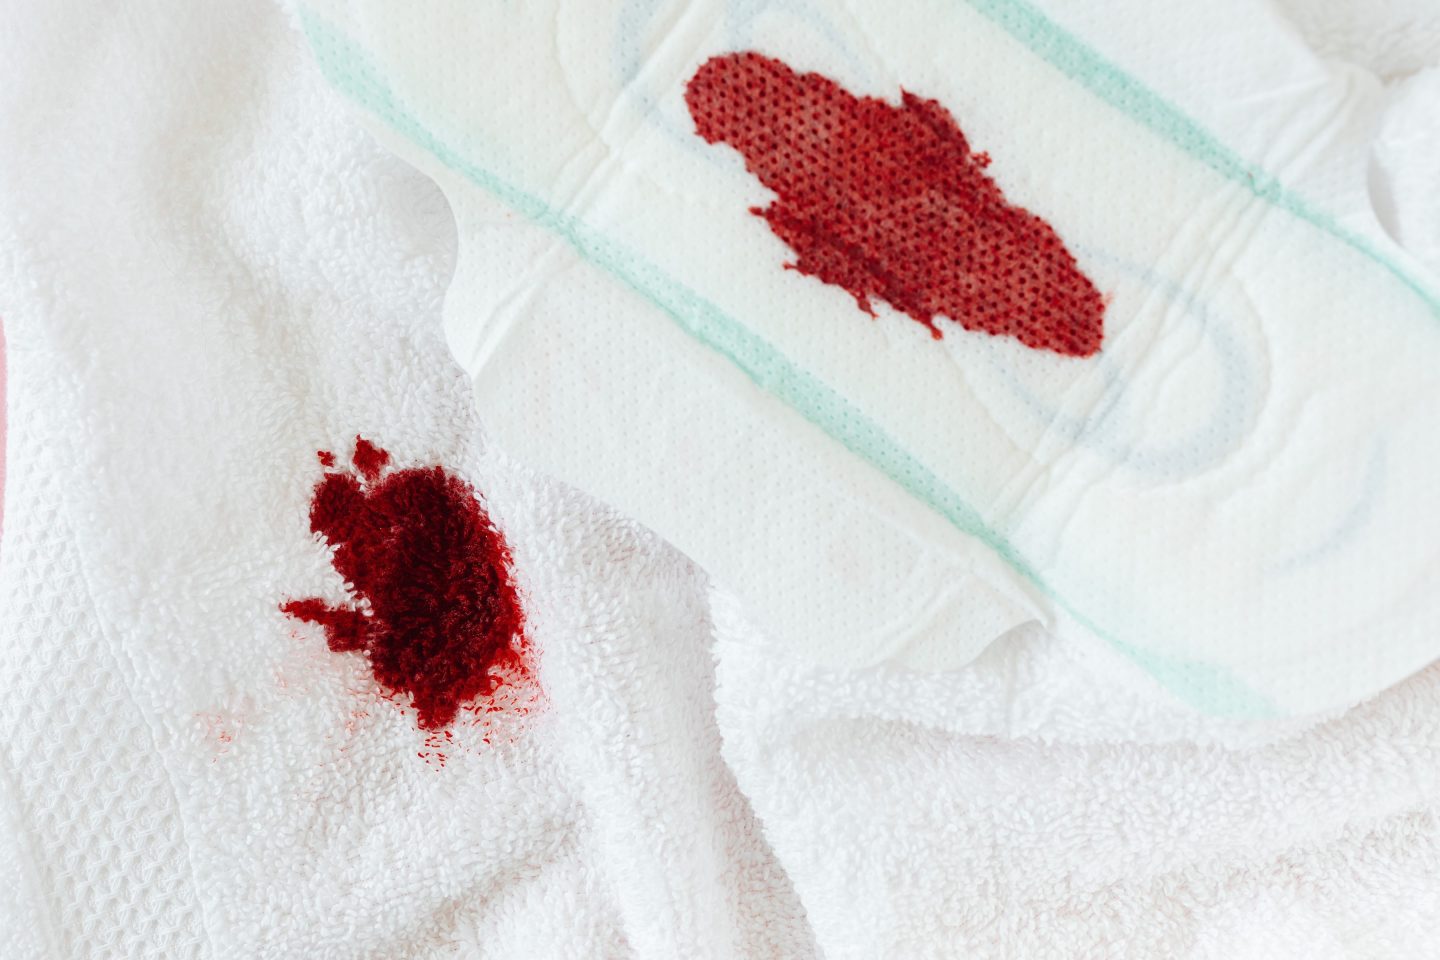 Menstrual blood on a white towel and menstrual pad